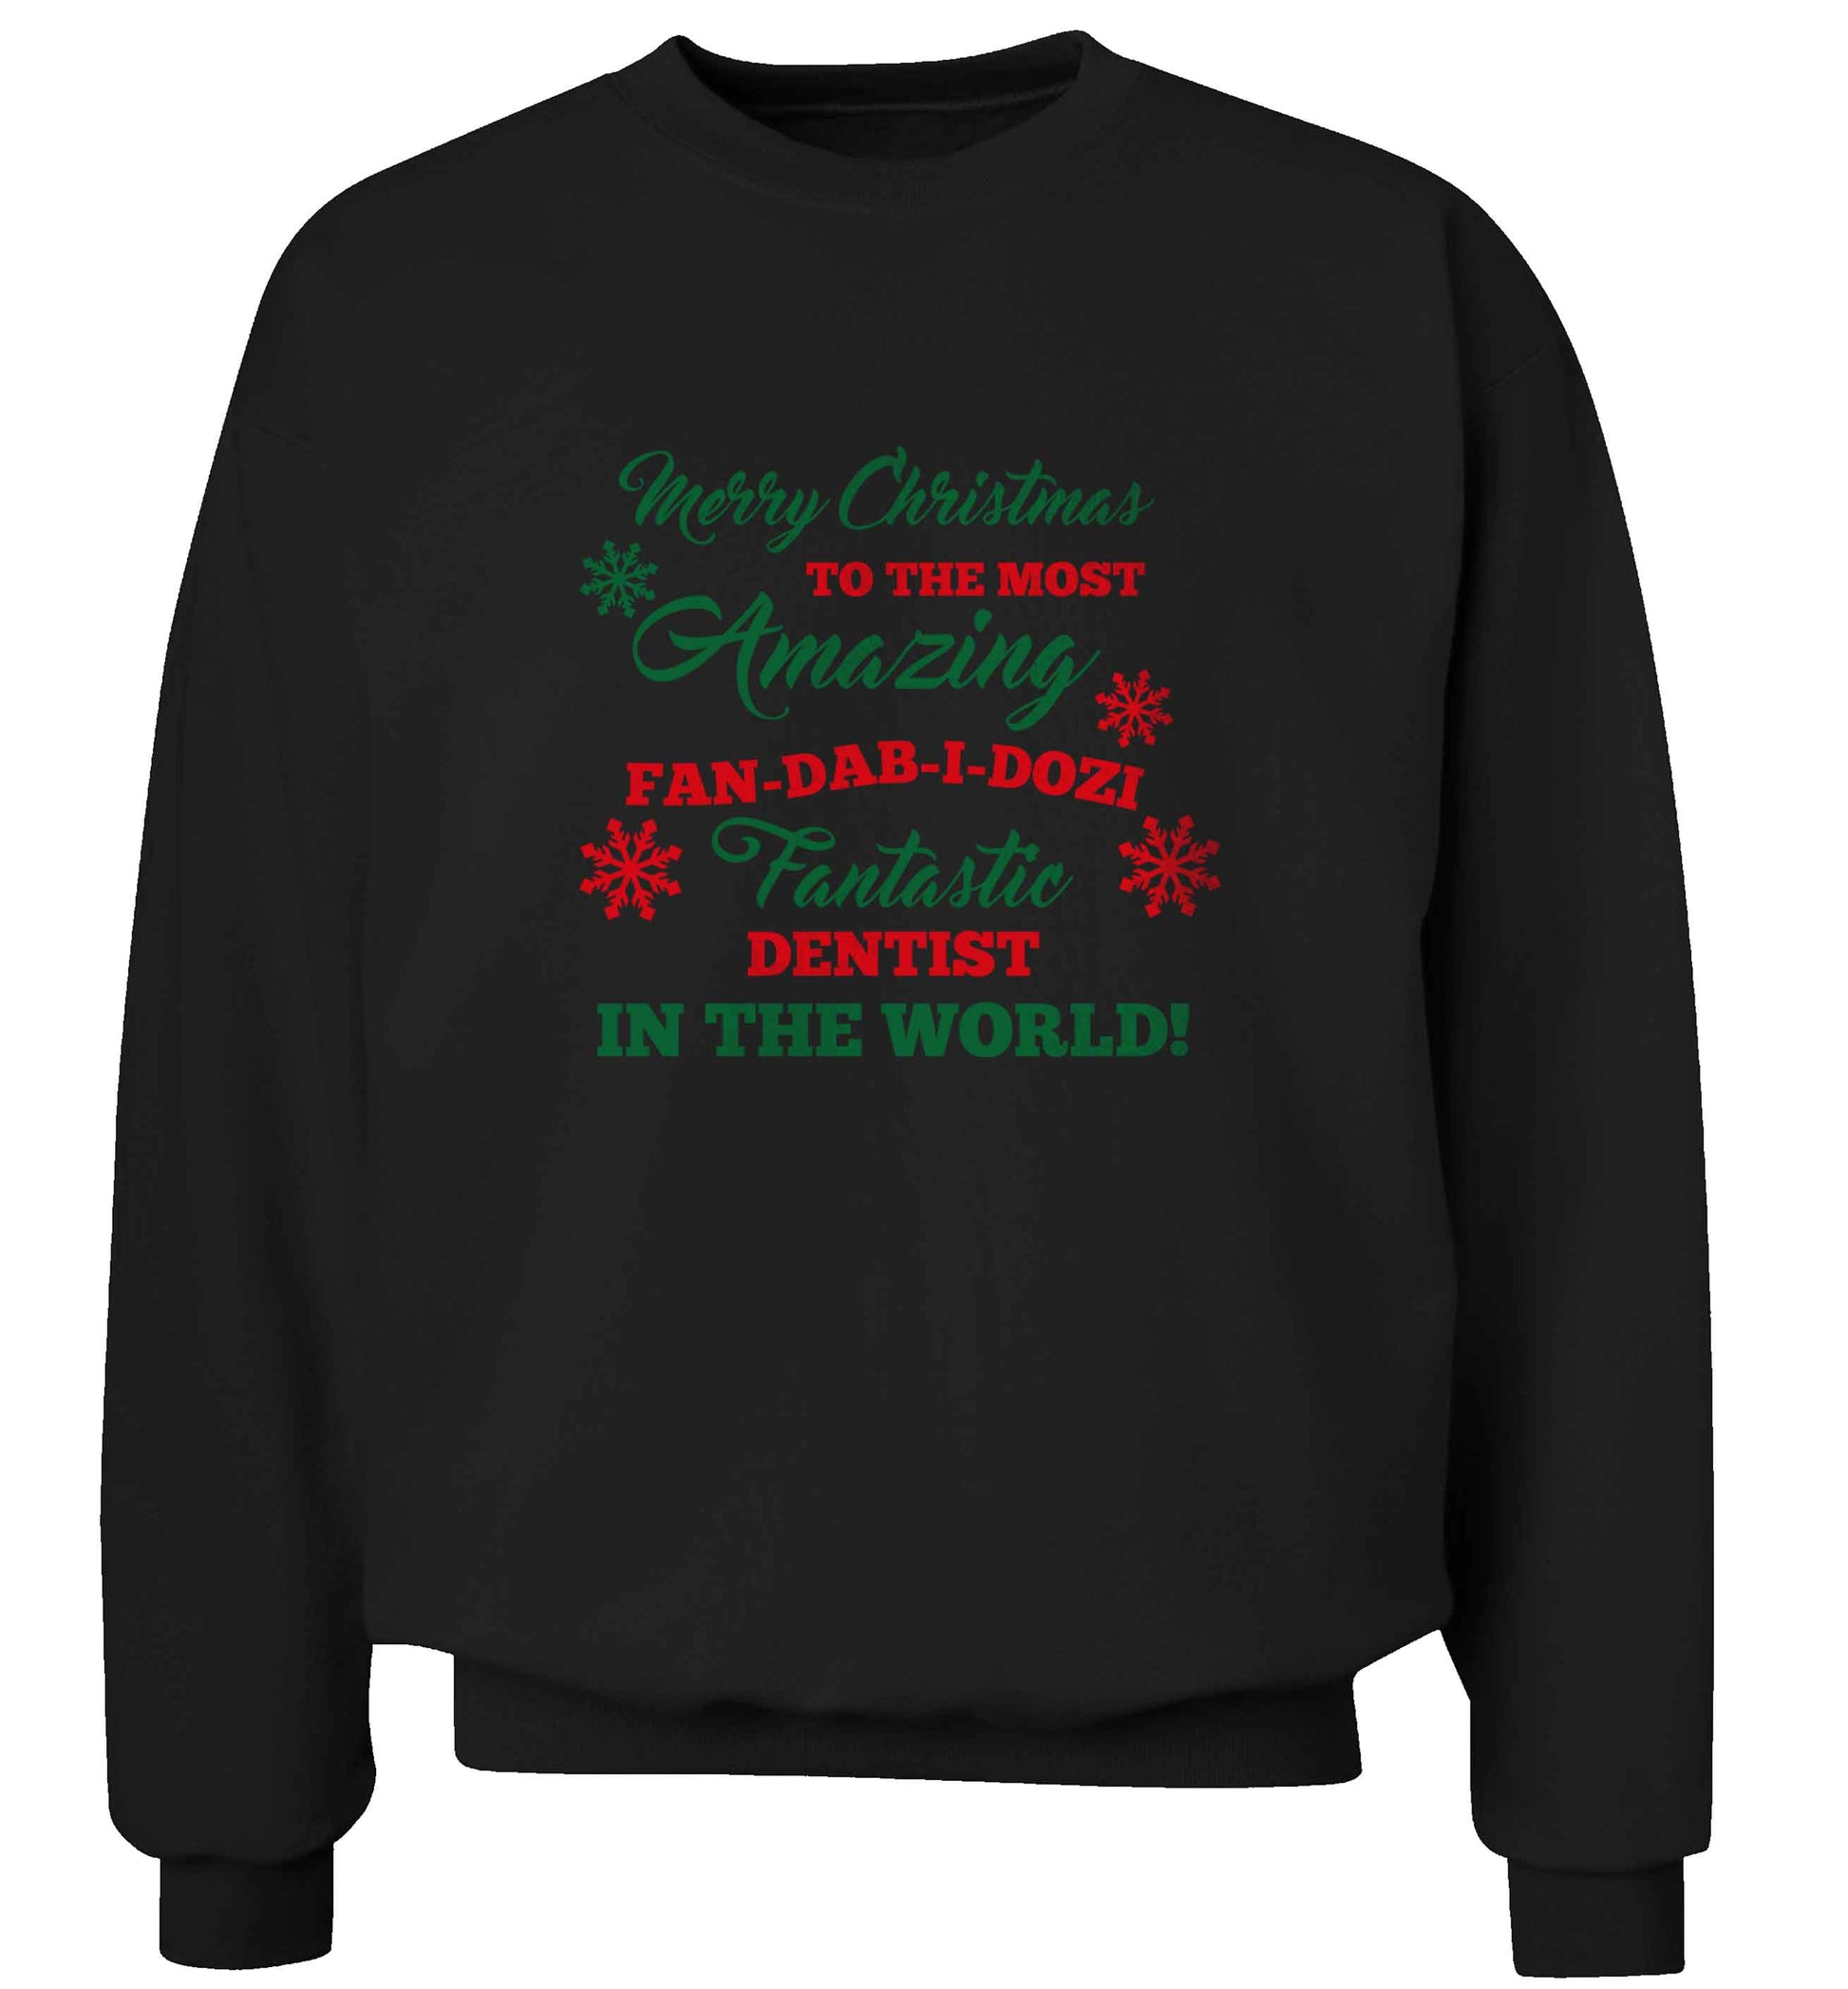 Merry Christmas to the most amazing dentist in the world! adult's unisex black sweater 2XL